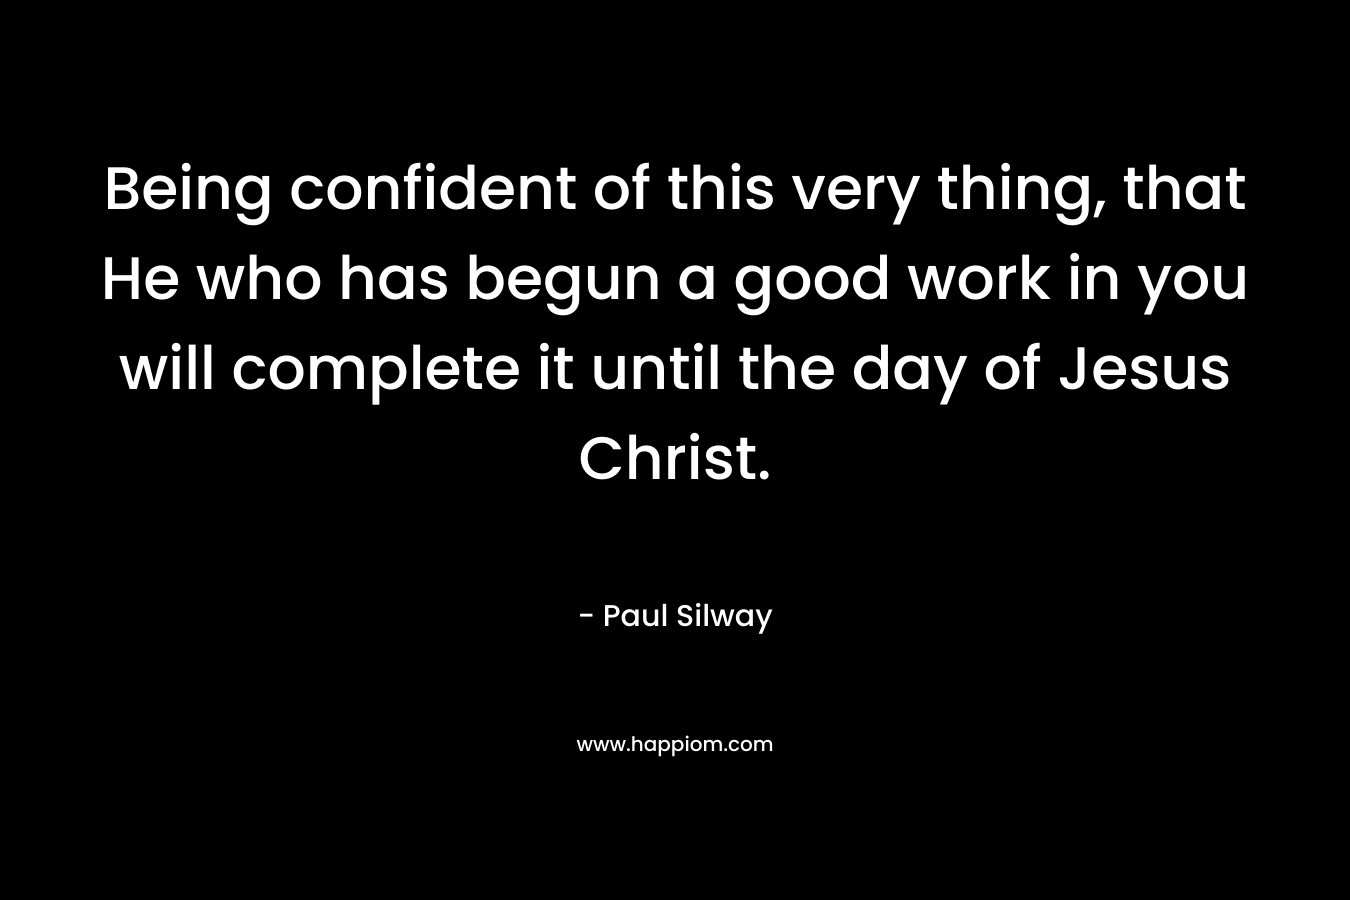 Being confident of this very thing, that He who has begun a good work in you will complete it until the day of Jesus Christ.